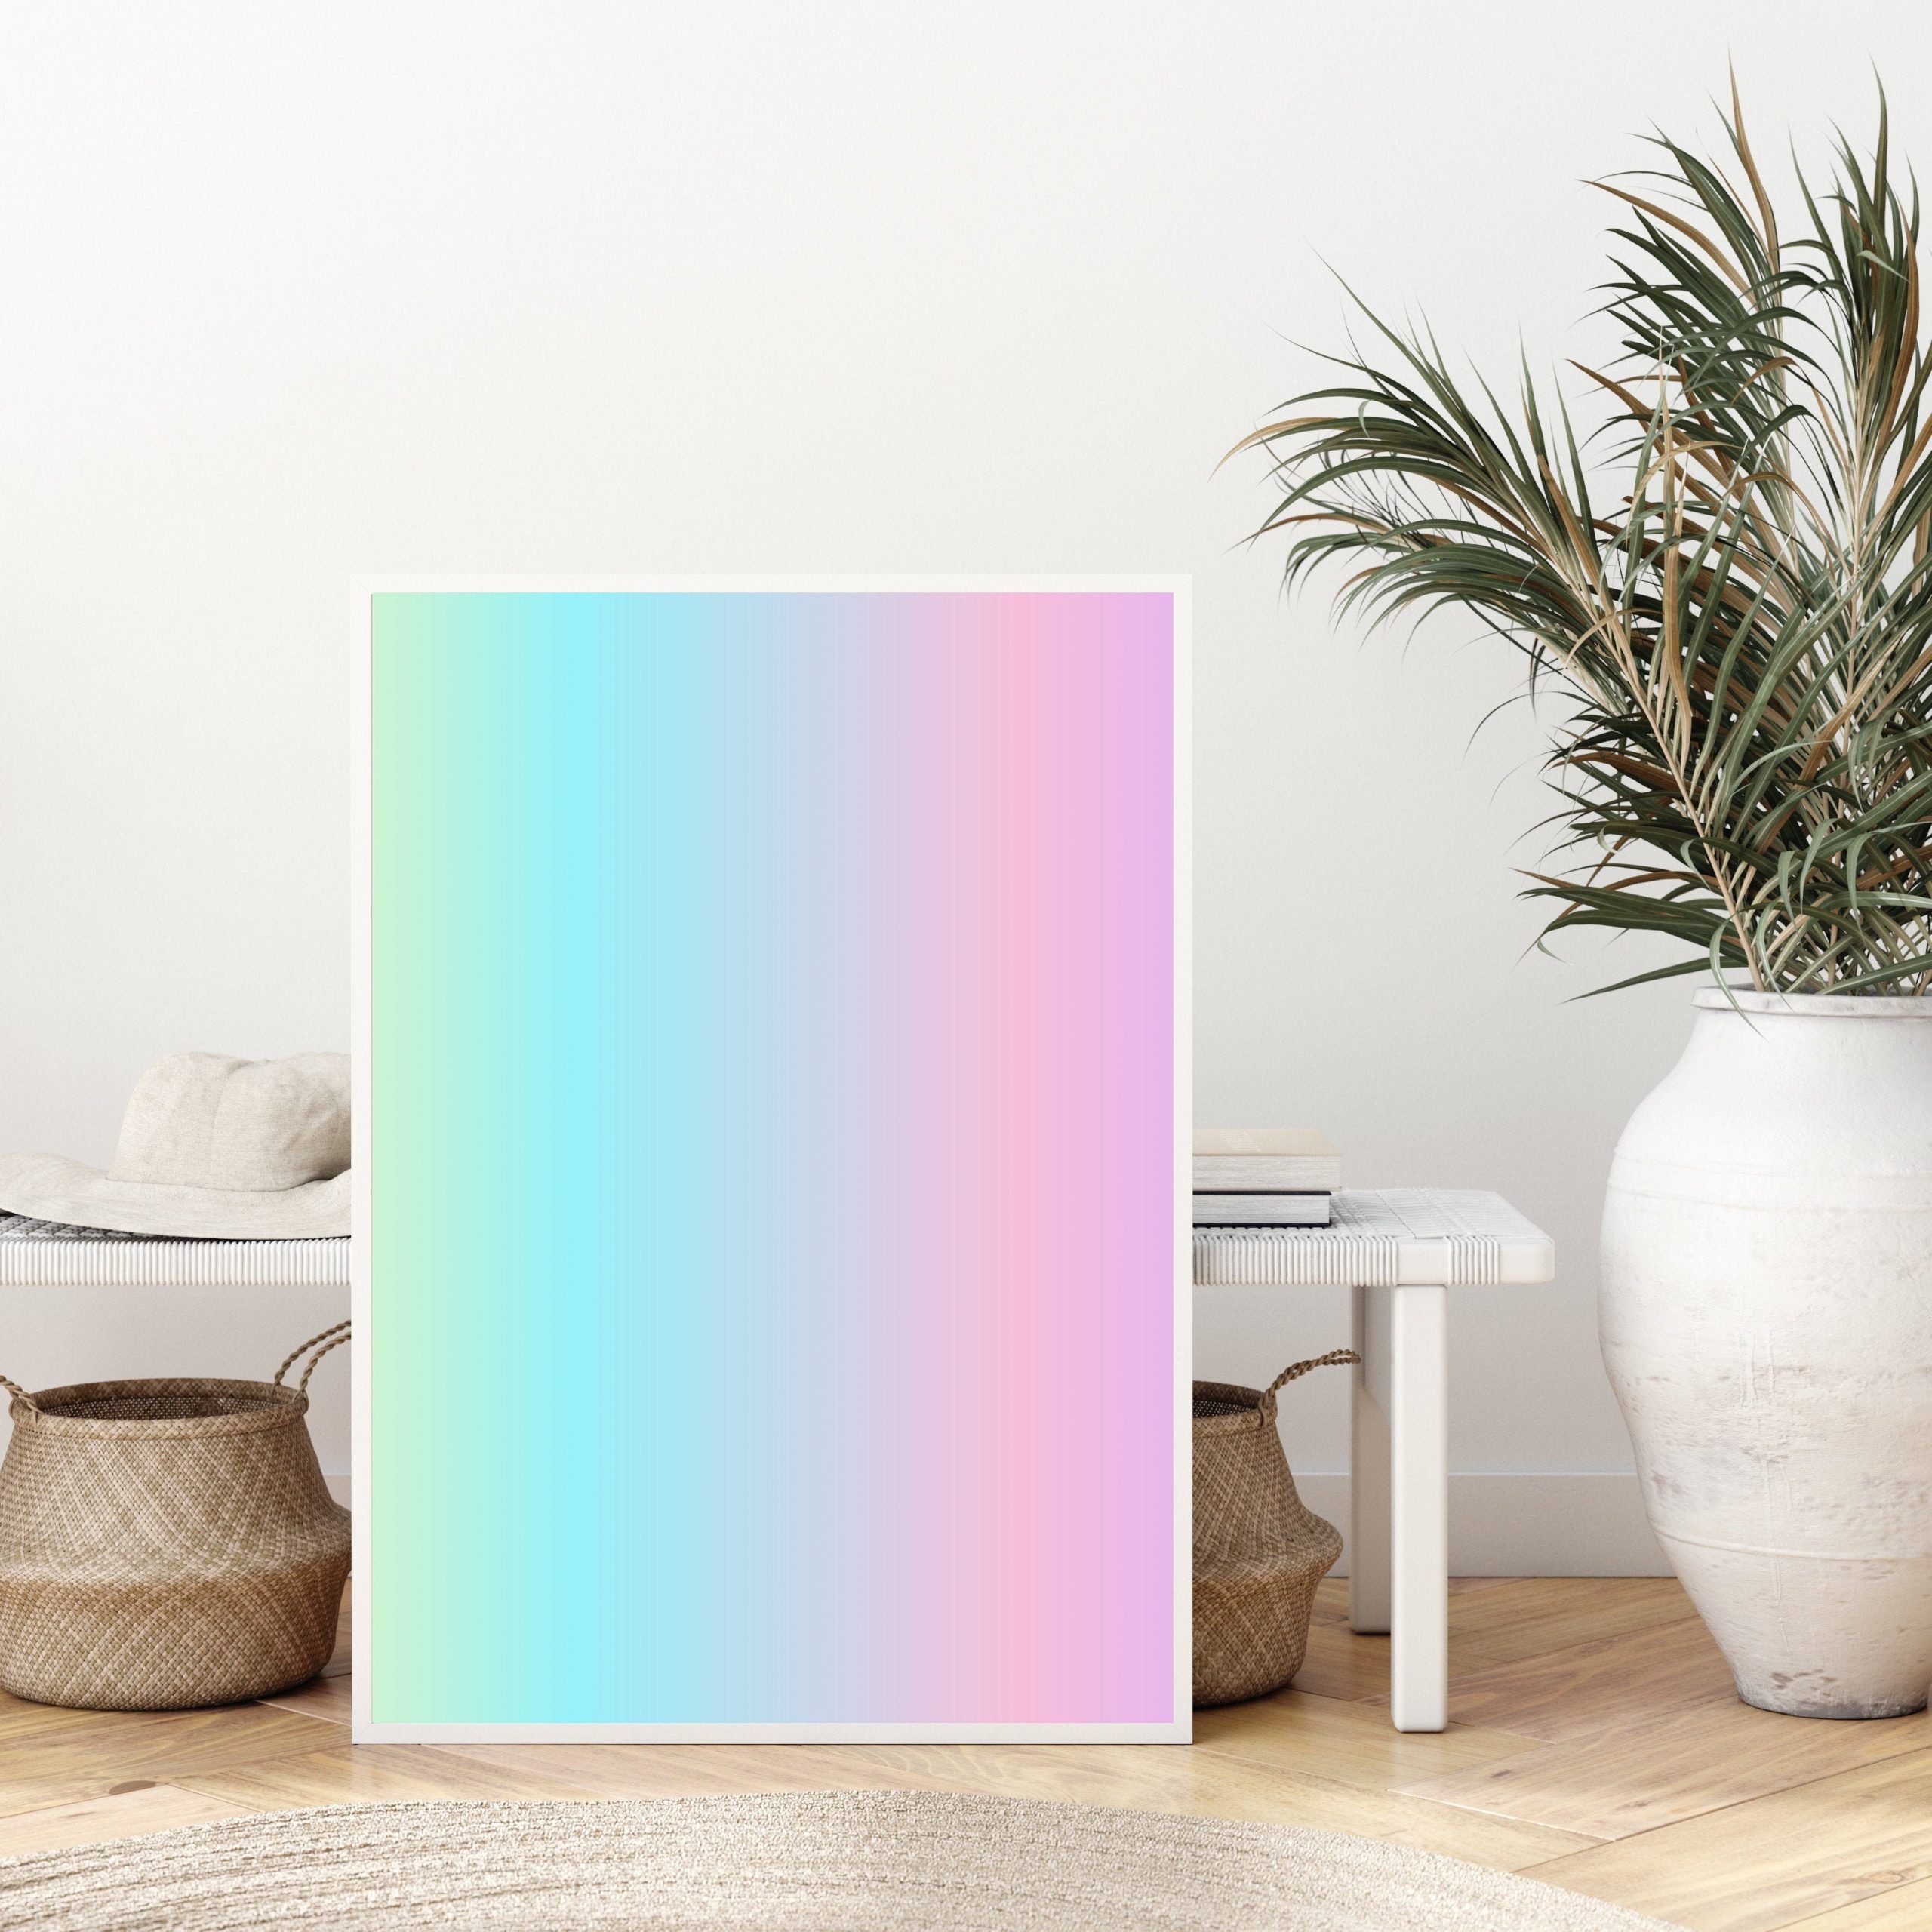 Gradient Print Wall Art Rainbow Poster Digital Aesthetic Intended For Most Recently Released Gradient Wall Art (Gallery 20 of 20)